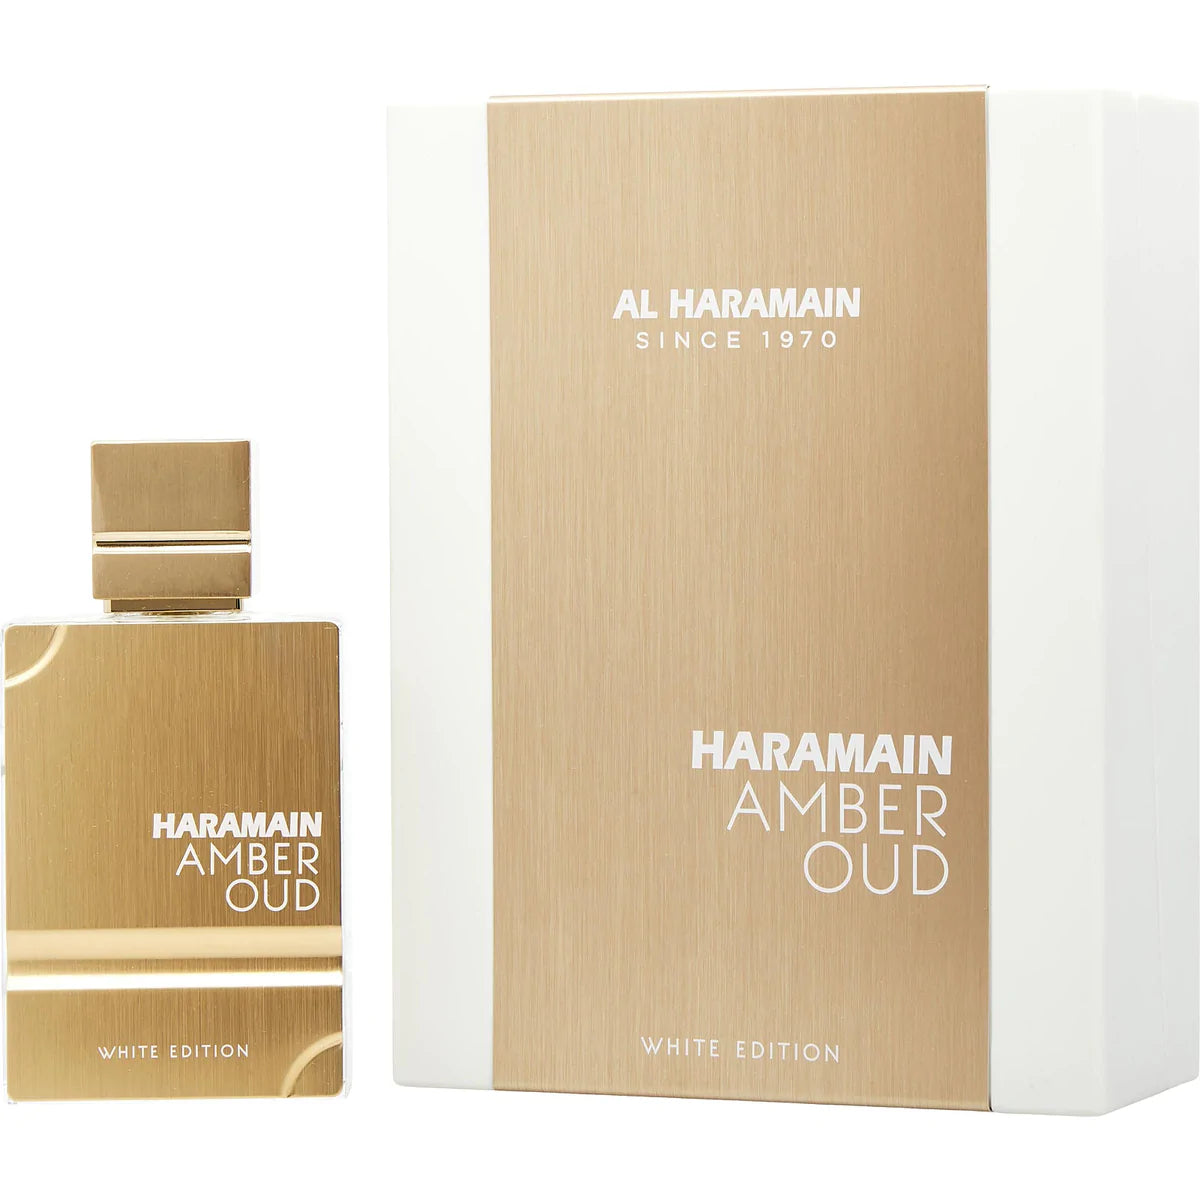 <meta charset="utf-8"><b data-mce-fragment="1">Amber Oud White Edition</b><span data-mce-fragment="1"> by </span><b data-mce-fragment="1">Al Haramain Perfumes</b><span data-mce-fragment="1"> is a Chypre Floral fragrance for women and men. This is a new fragrance. </span><b data-mce-fragment="1">Amber Oud White Edition</b><span data-mce-fragment="1"> was launched in 2022. Top notes are Bergamot and Orange; middle notes are Jasmine, Rose, Freesia and Cyclamen; base notes are Patchouli, Musk, Vanilla and Vetiver.</span>